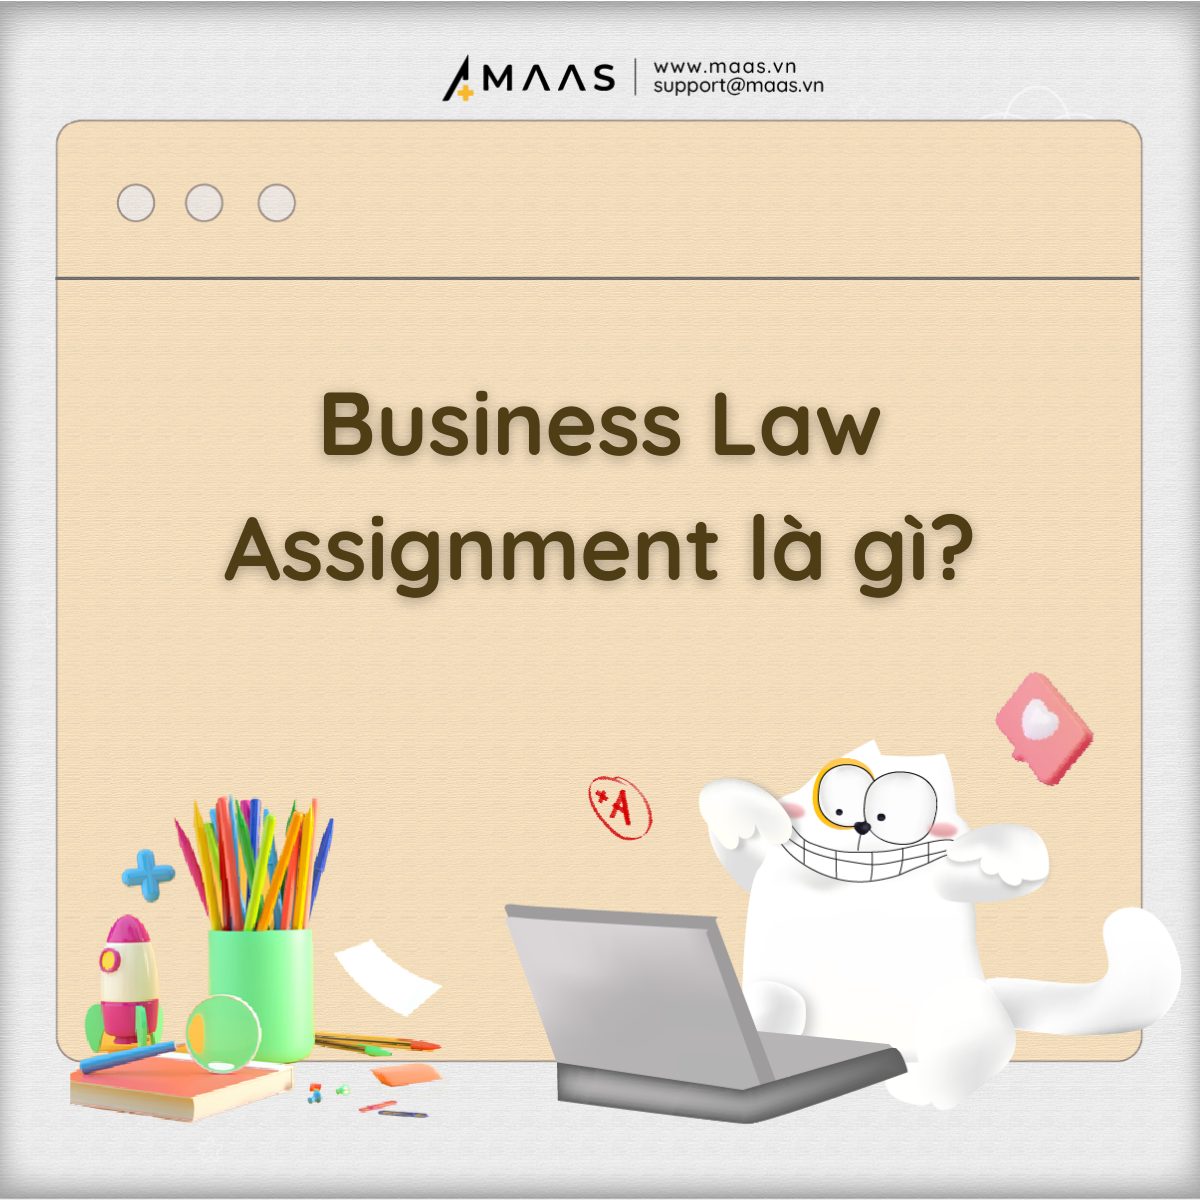 Business Law Assignment